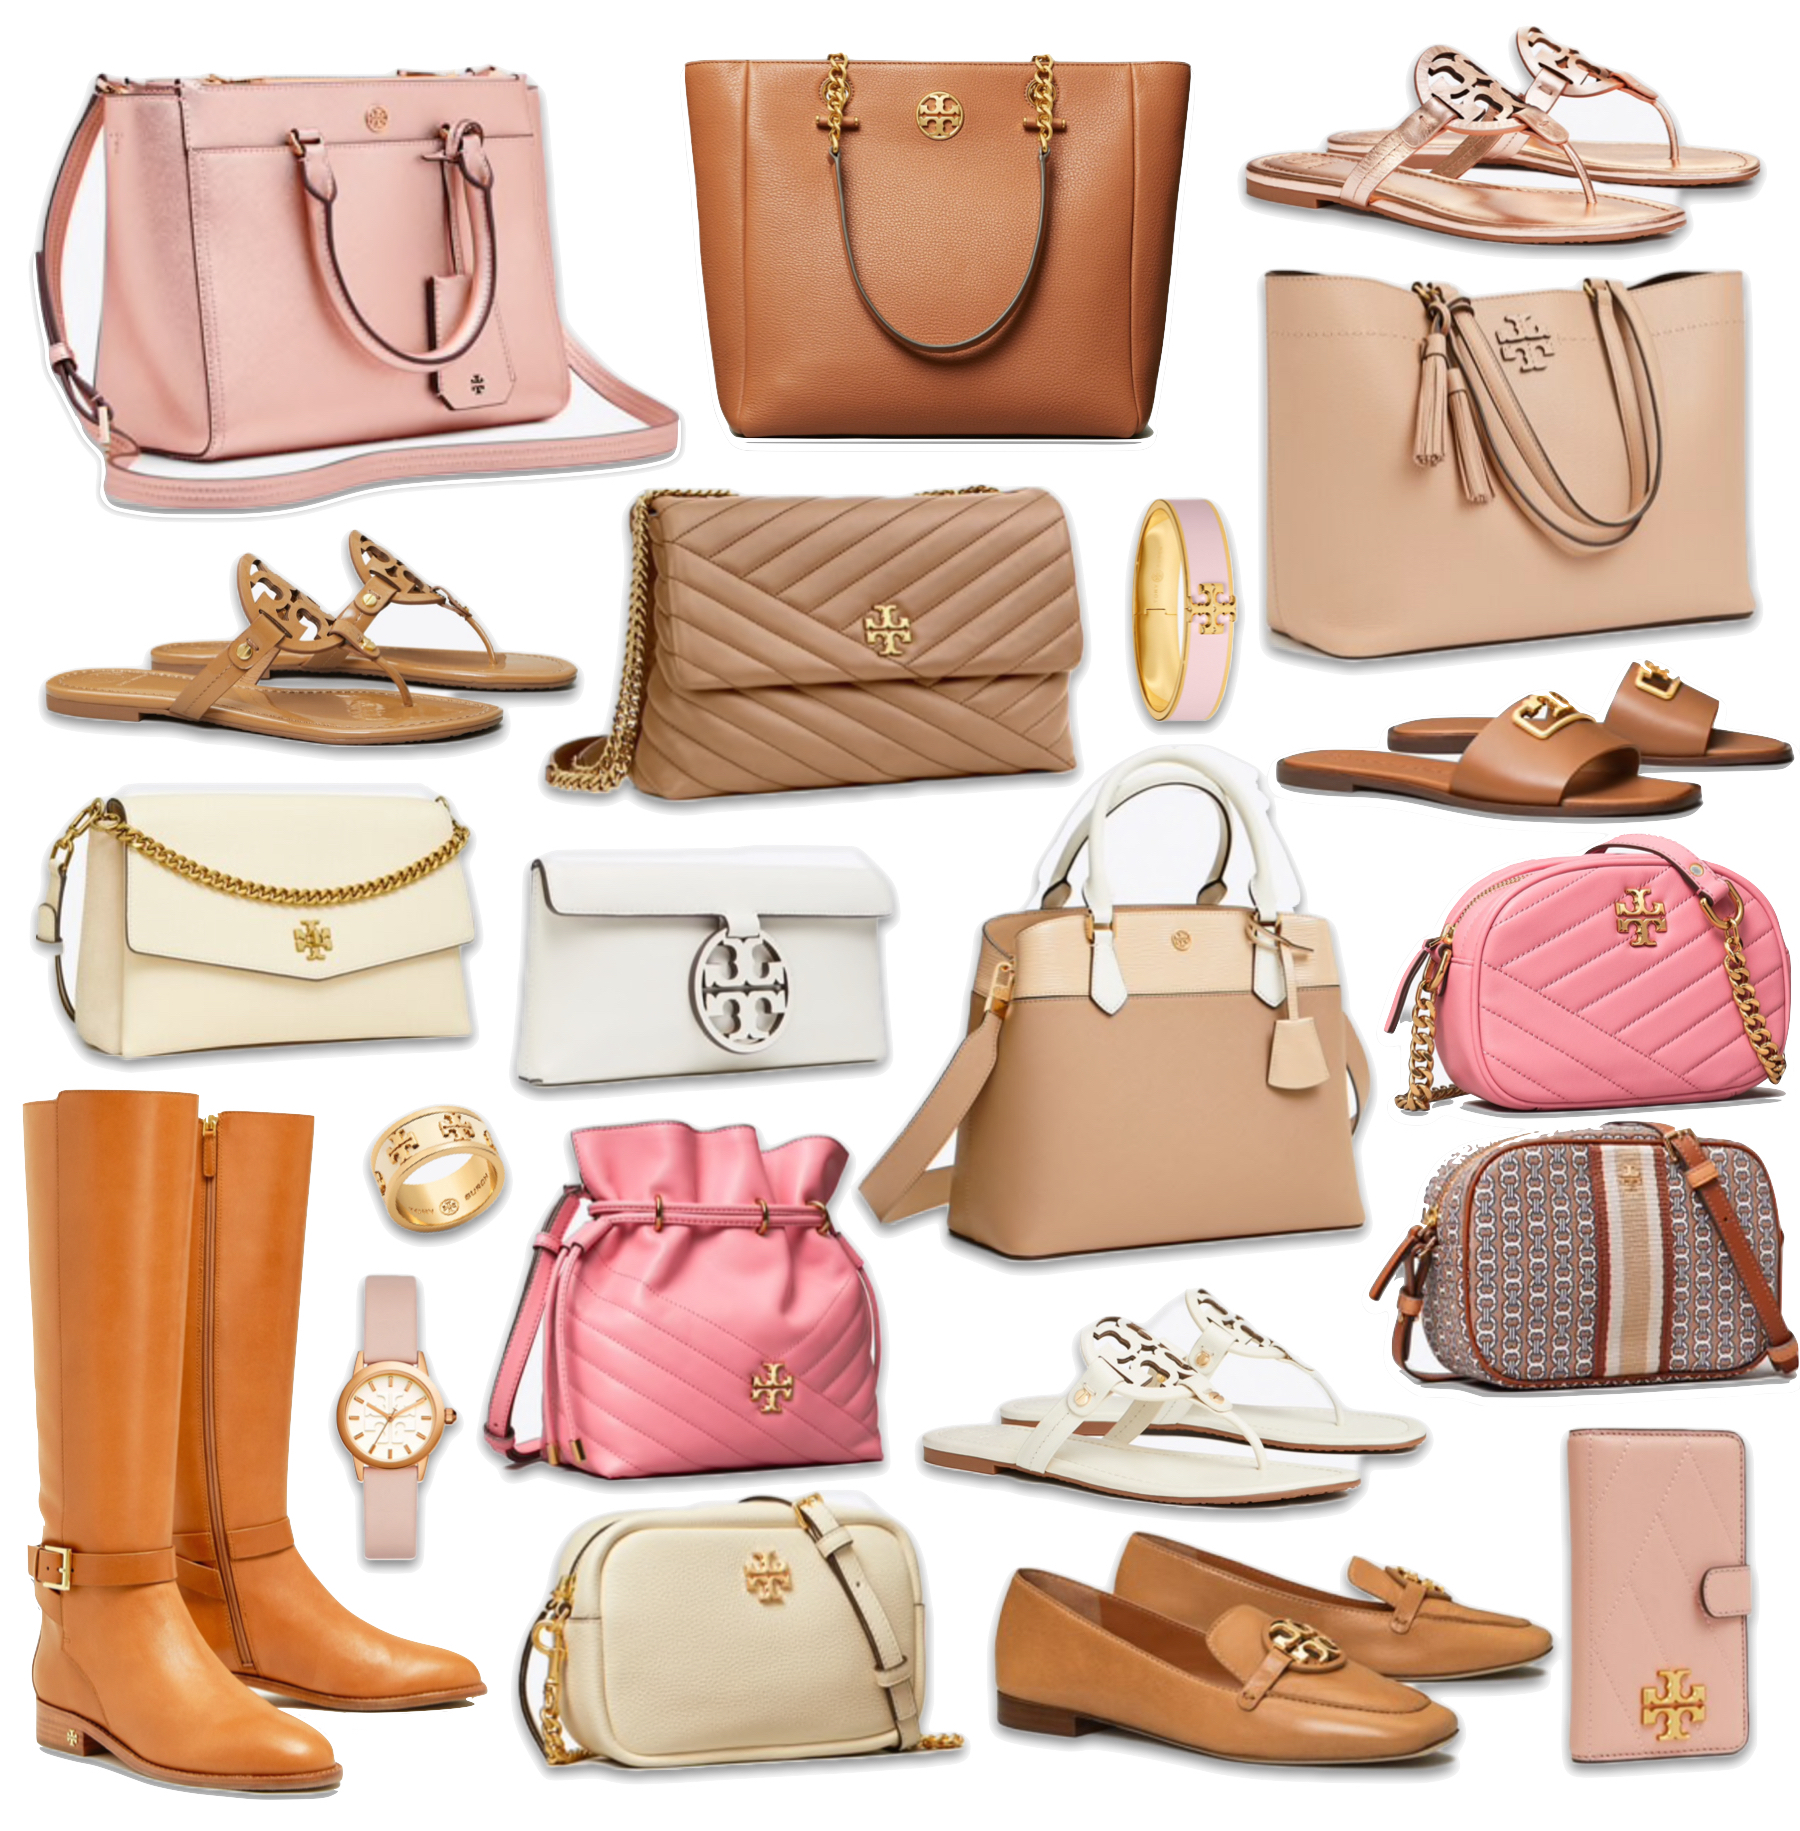 Tory Burch Private Sale 2020 | Save Up To 70% Off!! - The Double Take Girls